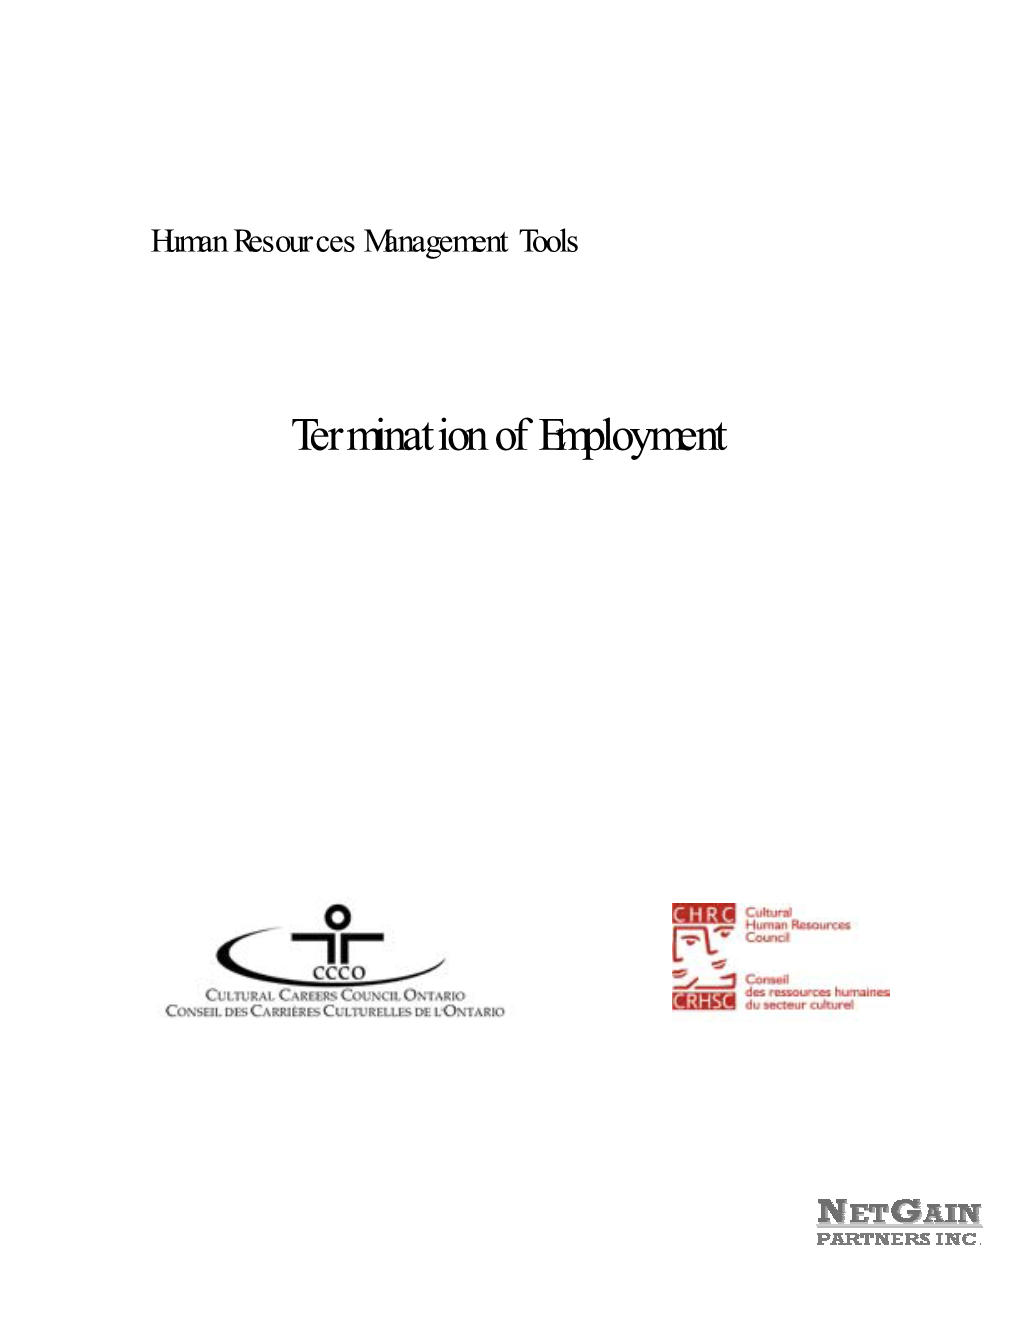 Human Resources Management Tools Termination of Employment